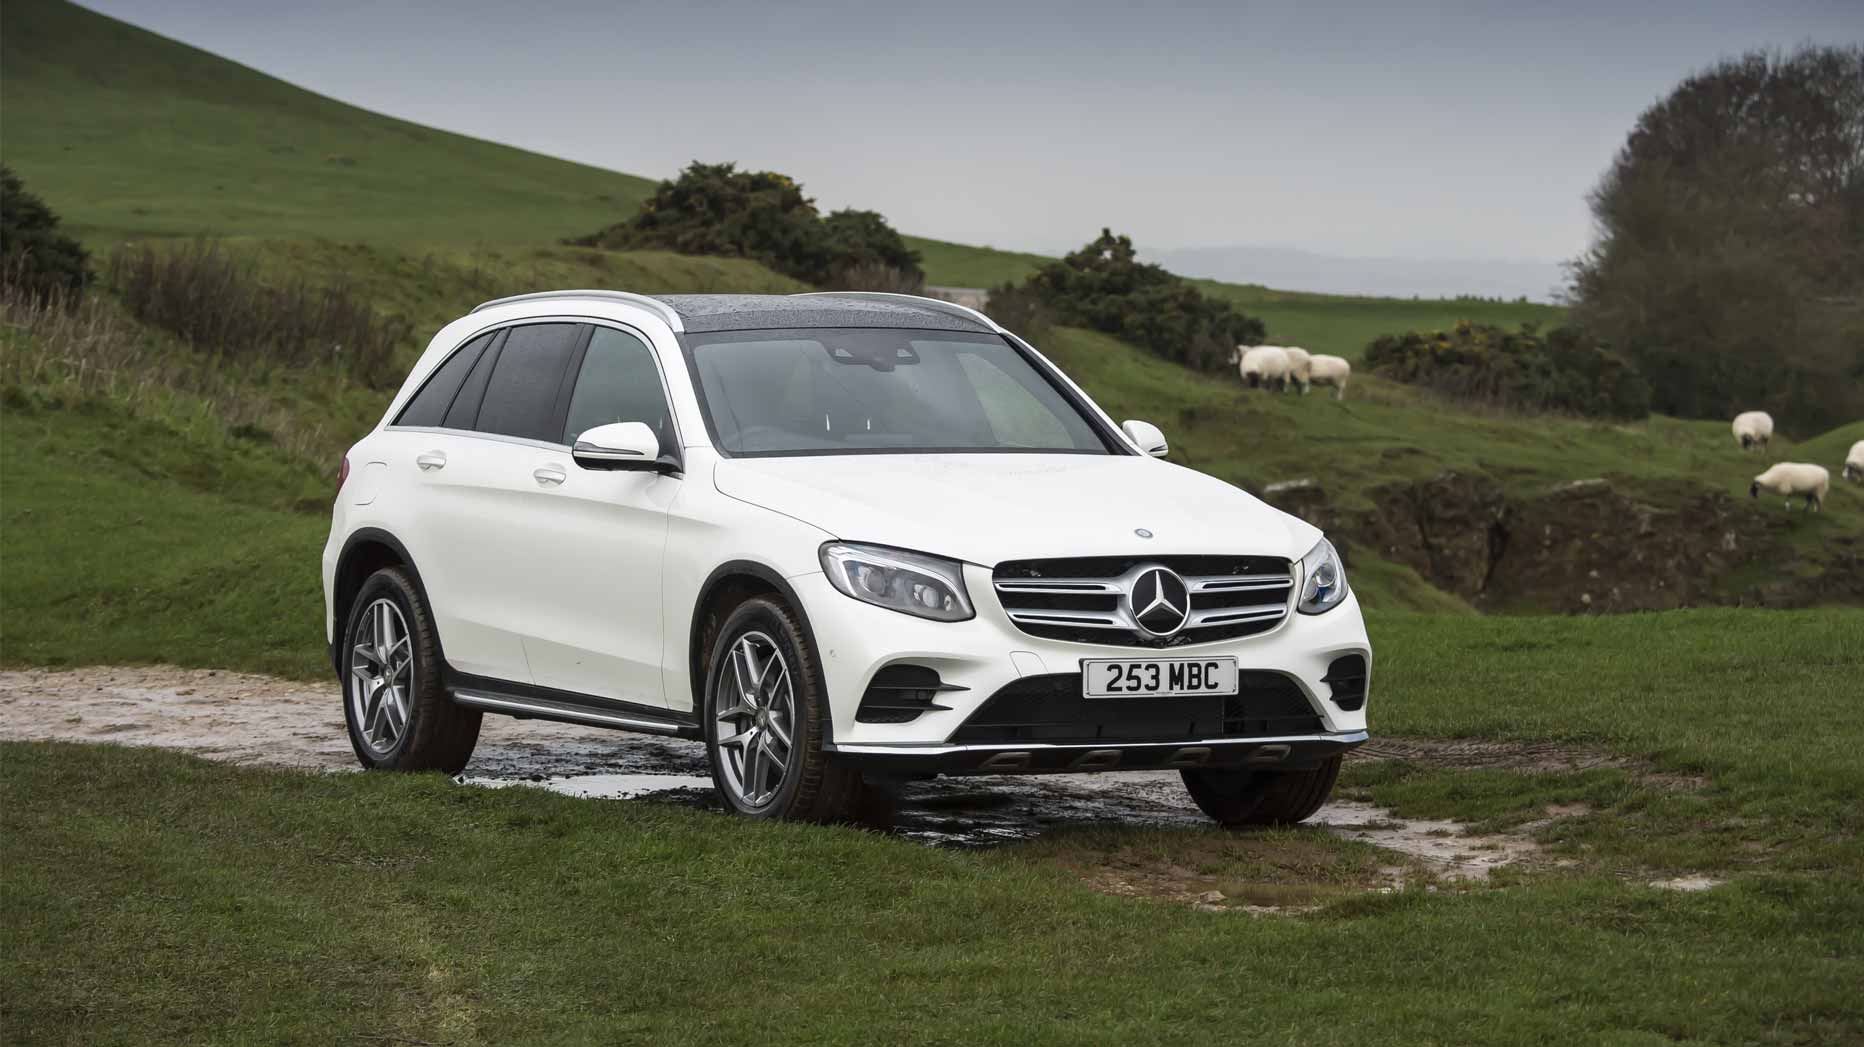 Approved Used Mercedes Benz Glc Class Lookers